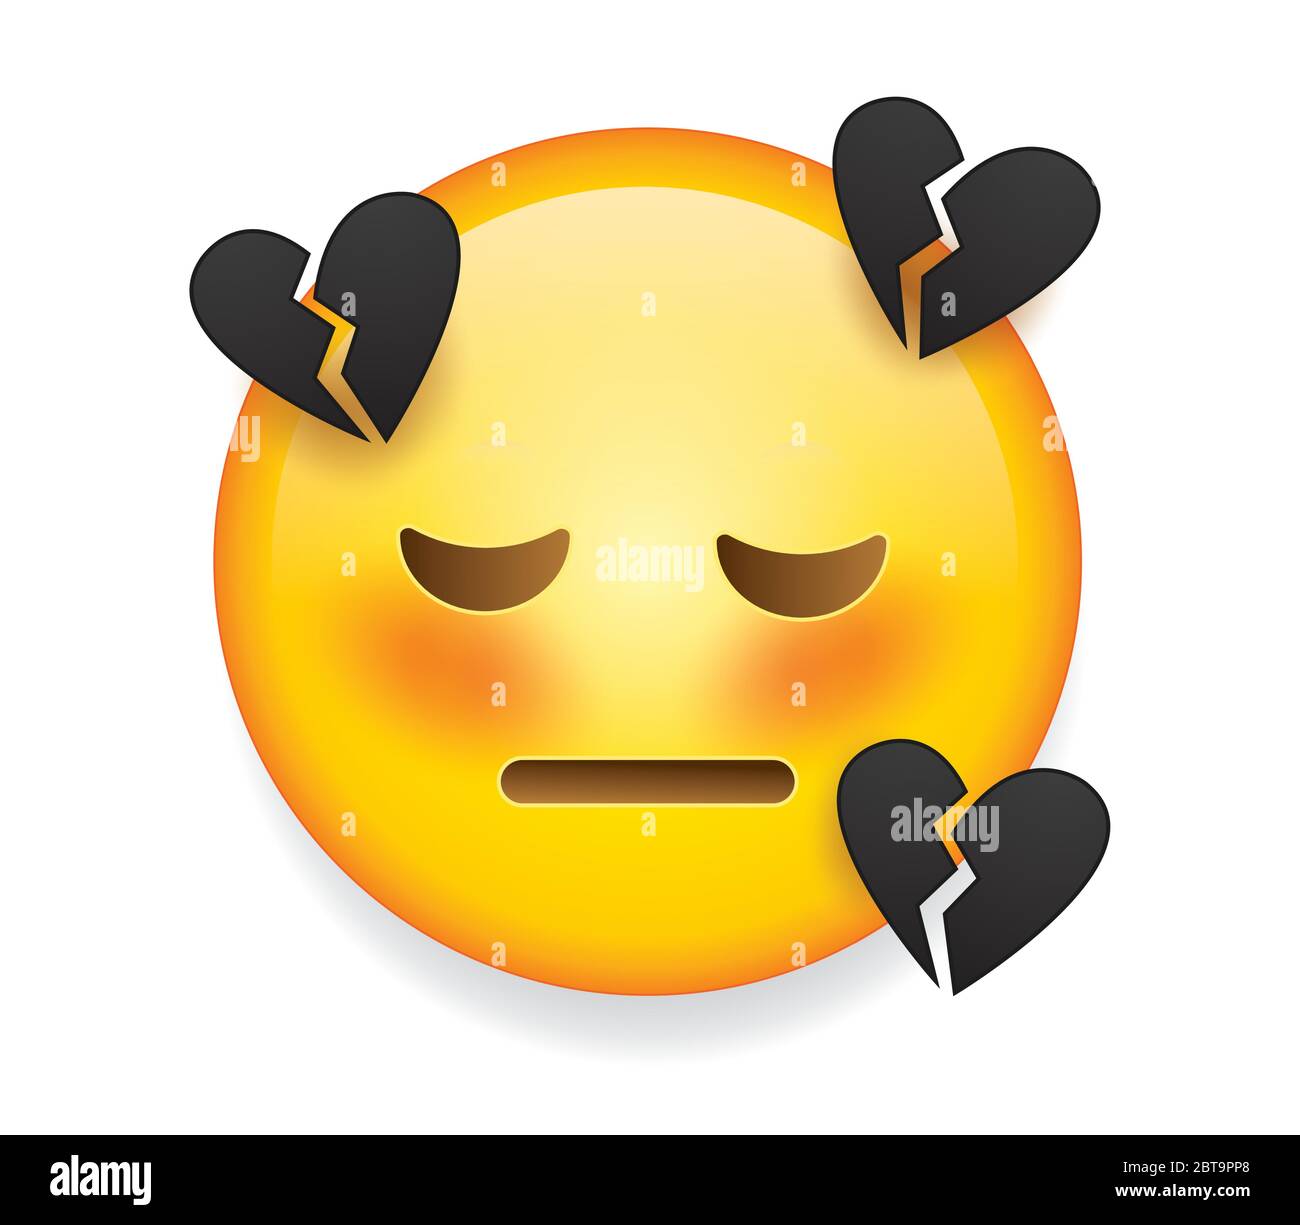 Featured image of post Black Background Png Black Broken Heart Emoji : Pin amazing png images that you like.